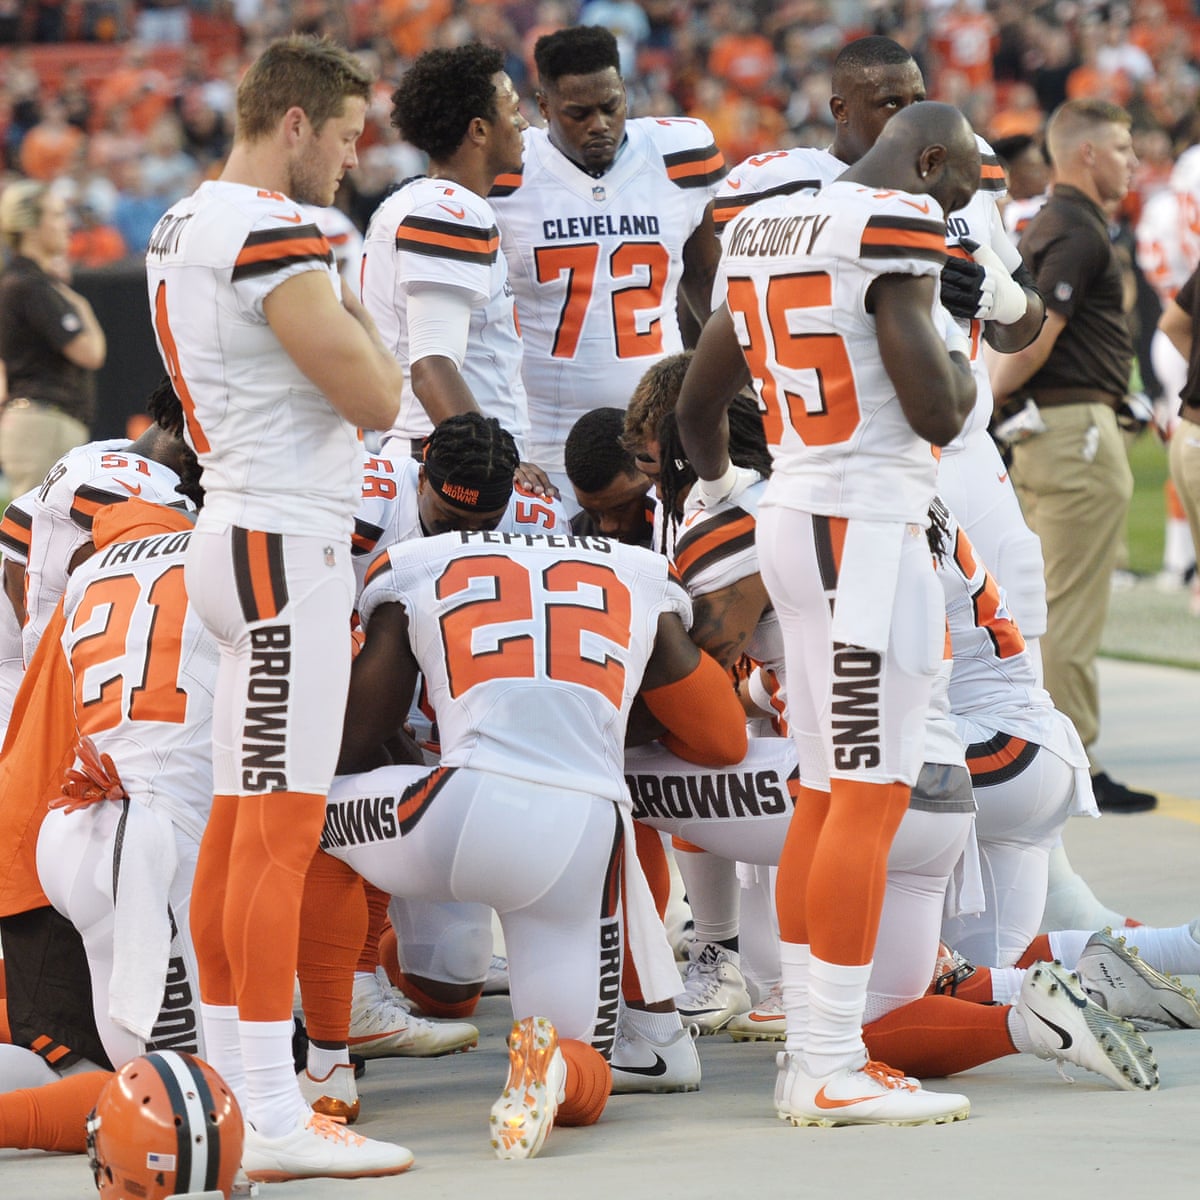 Two white players join Cleveland Browns in NFL's largest anthem protest |  NFL | The Guardian